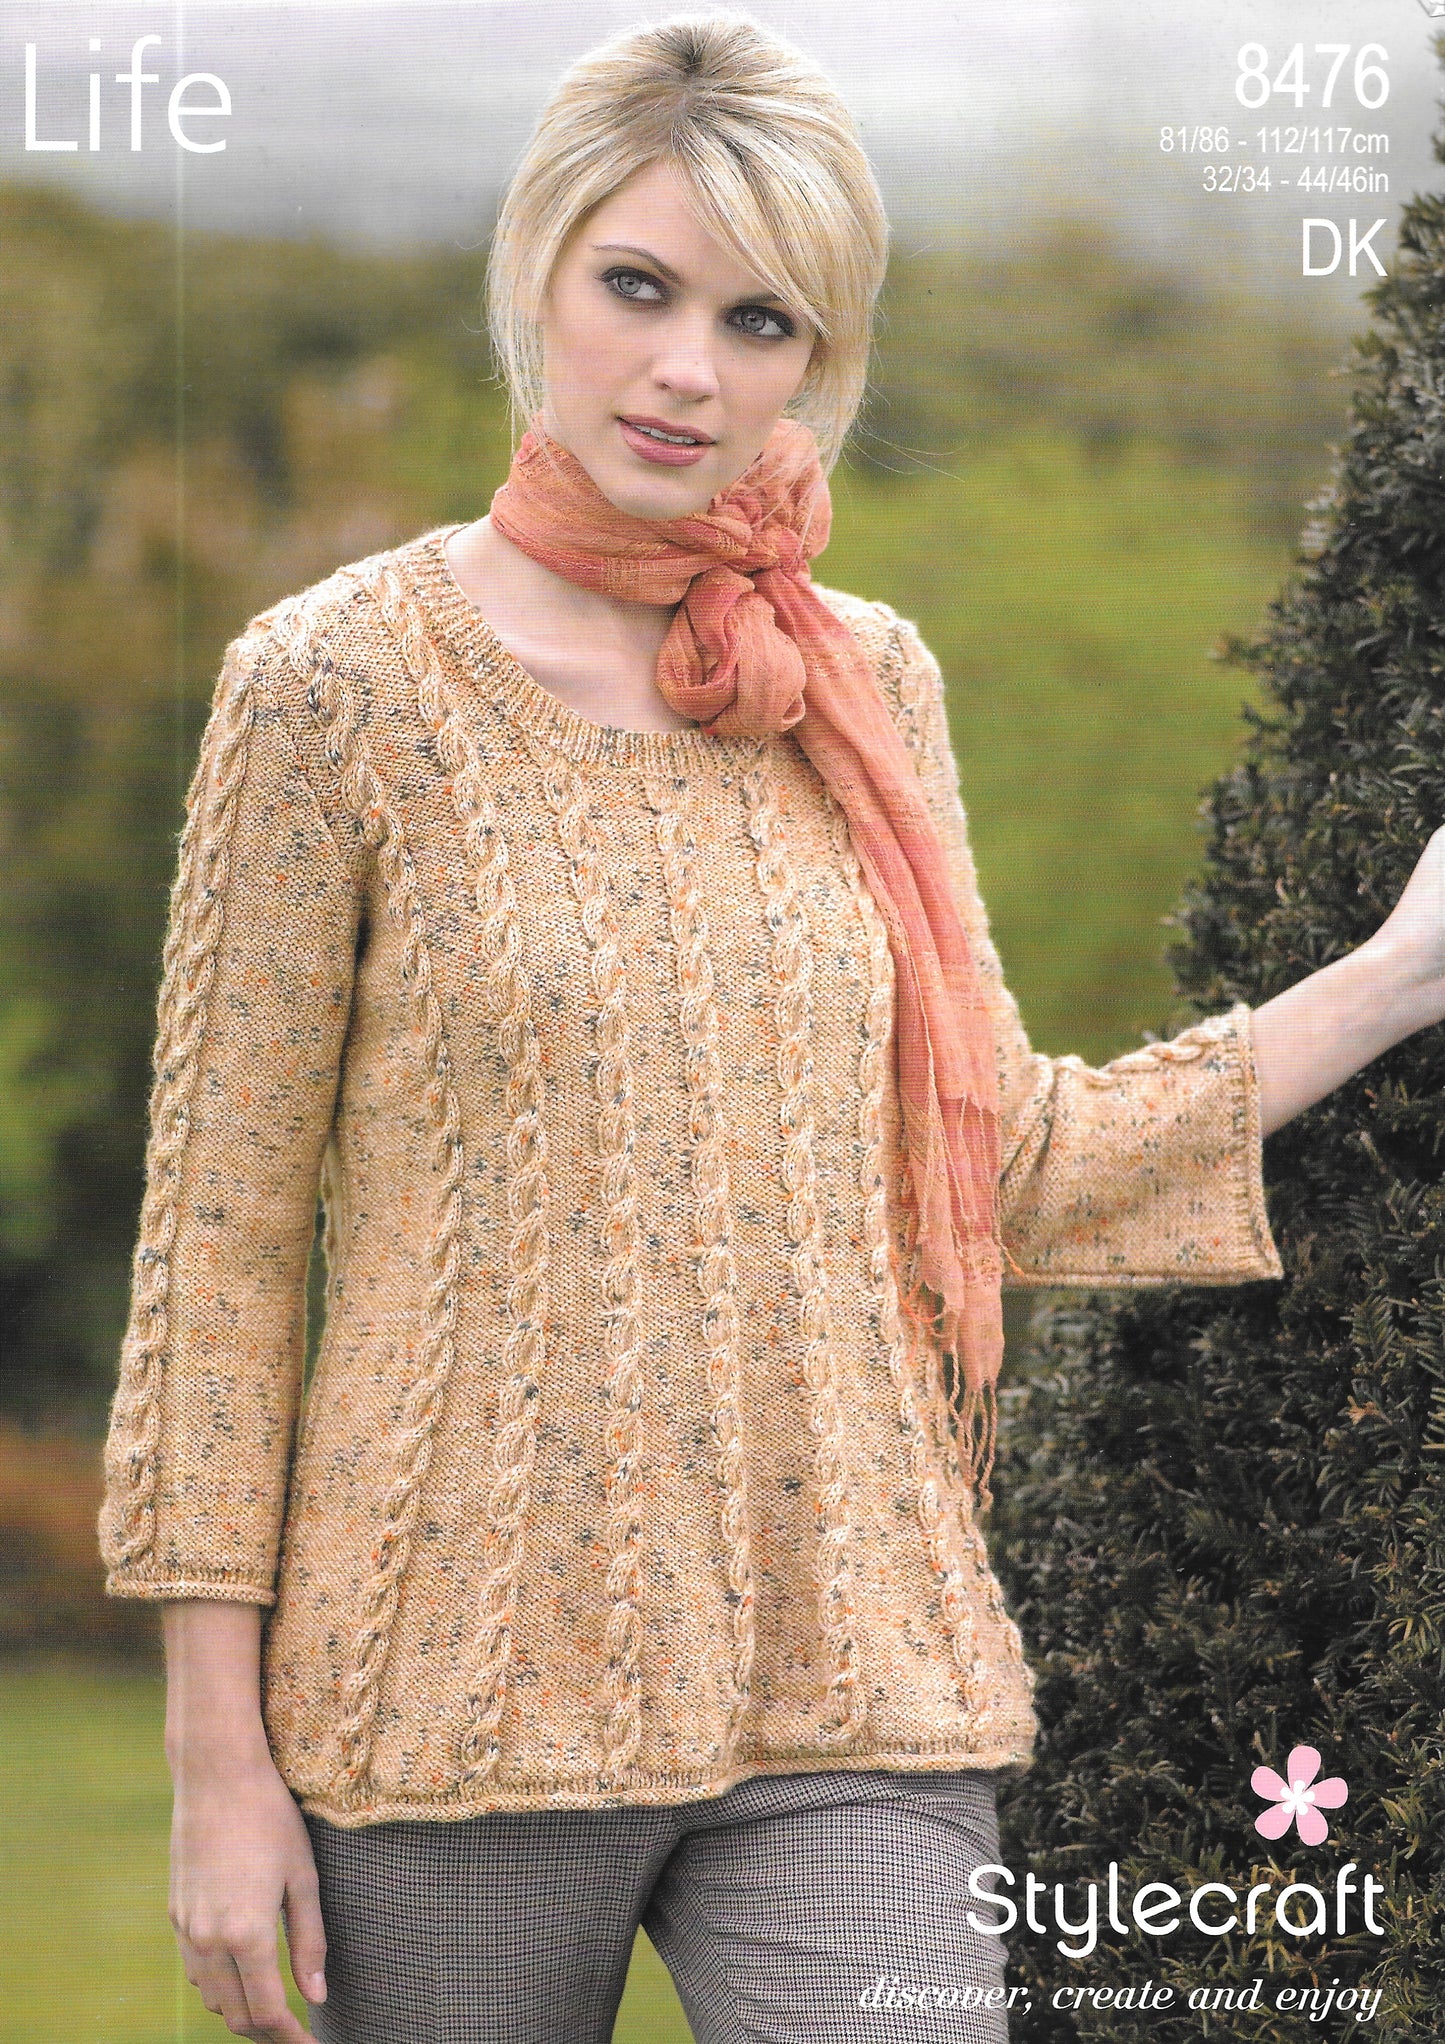 8476 Stylecraft Ladies cable sweater knitting pattern